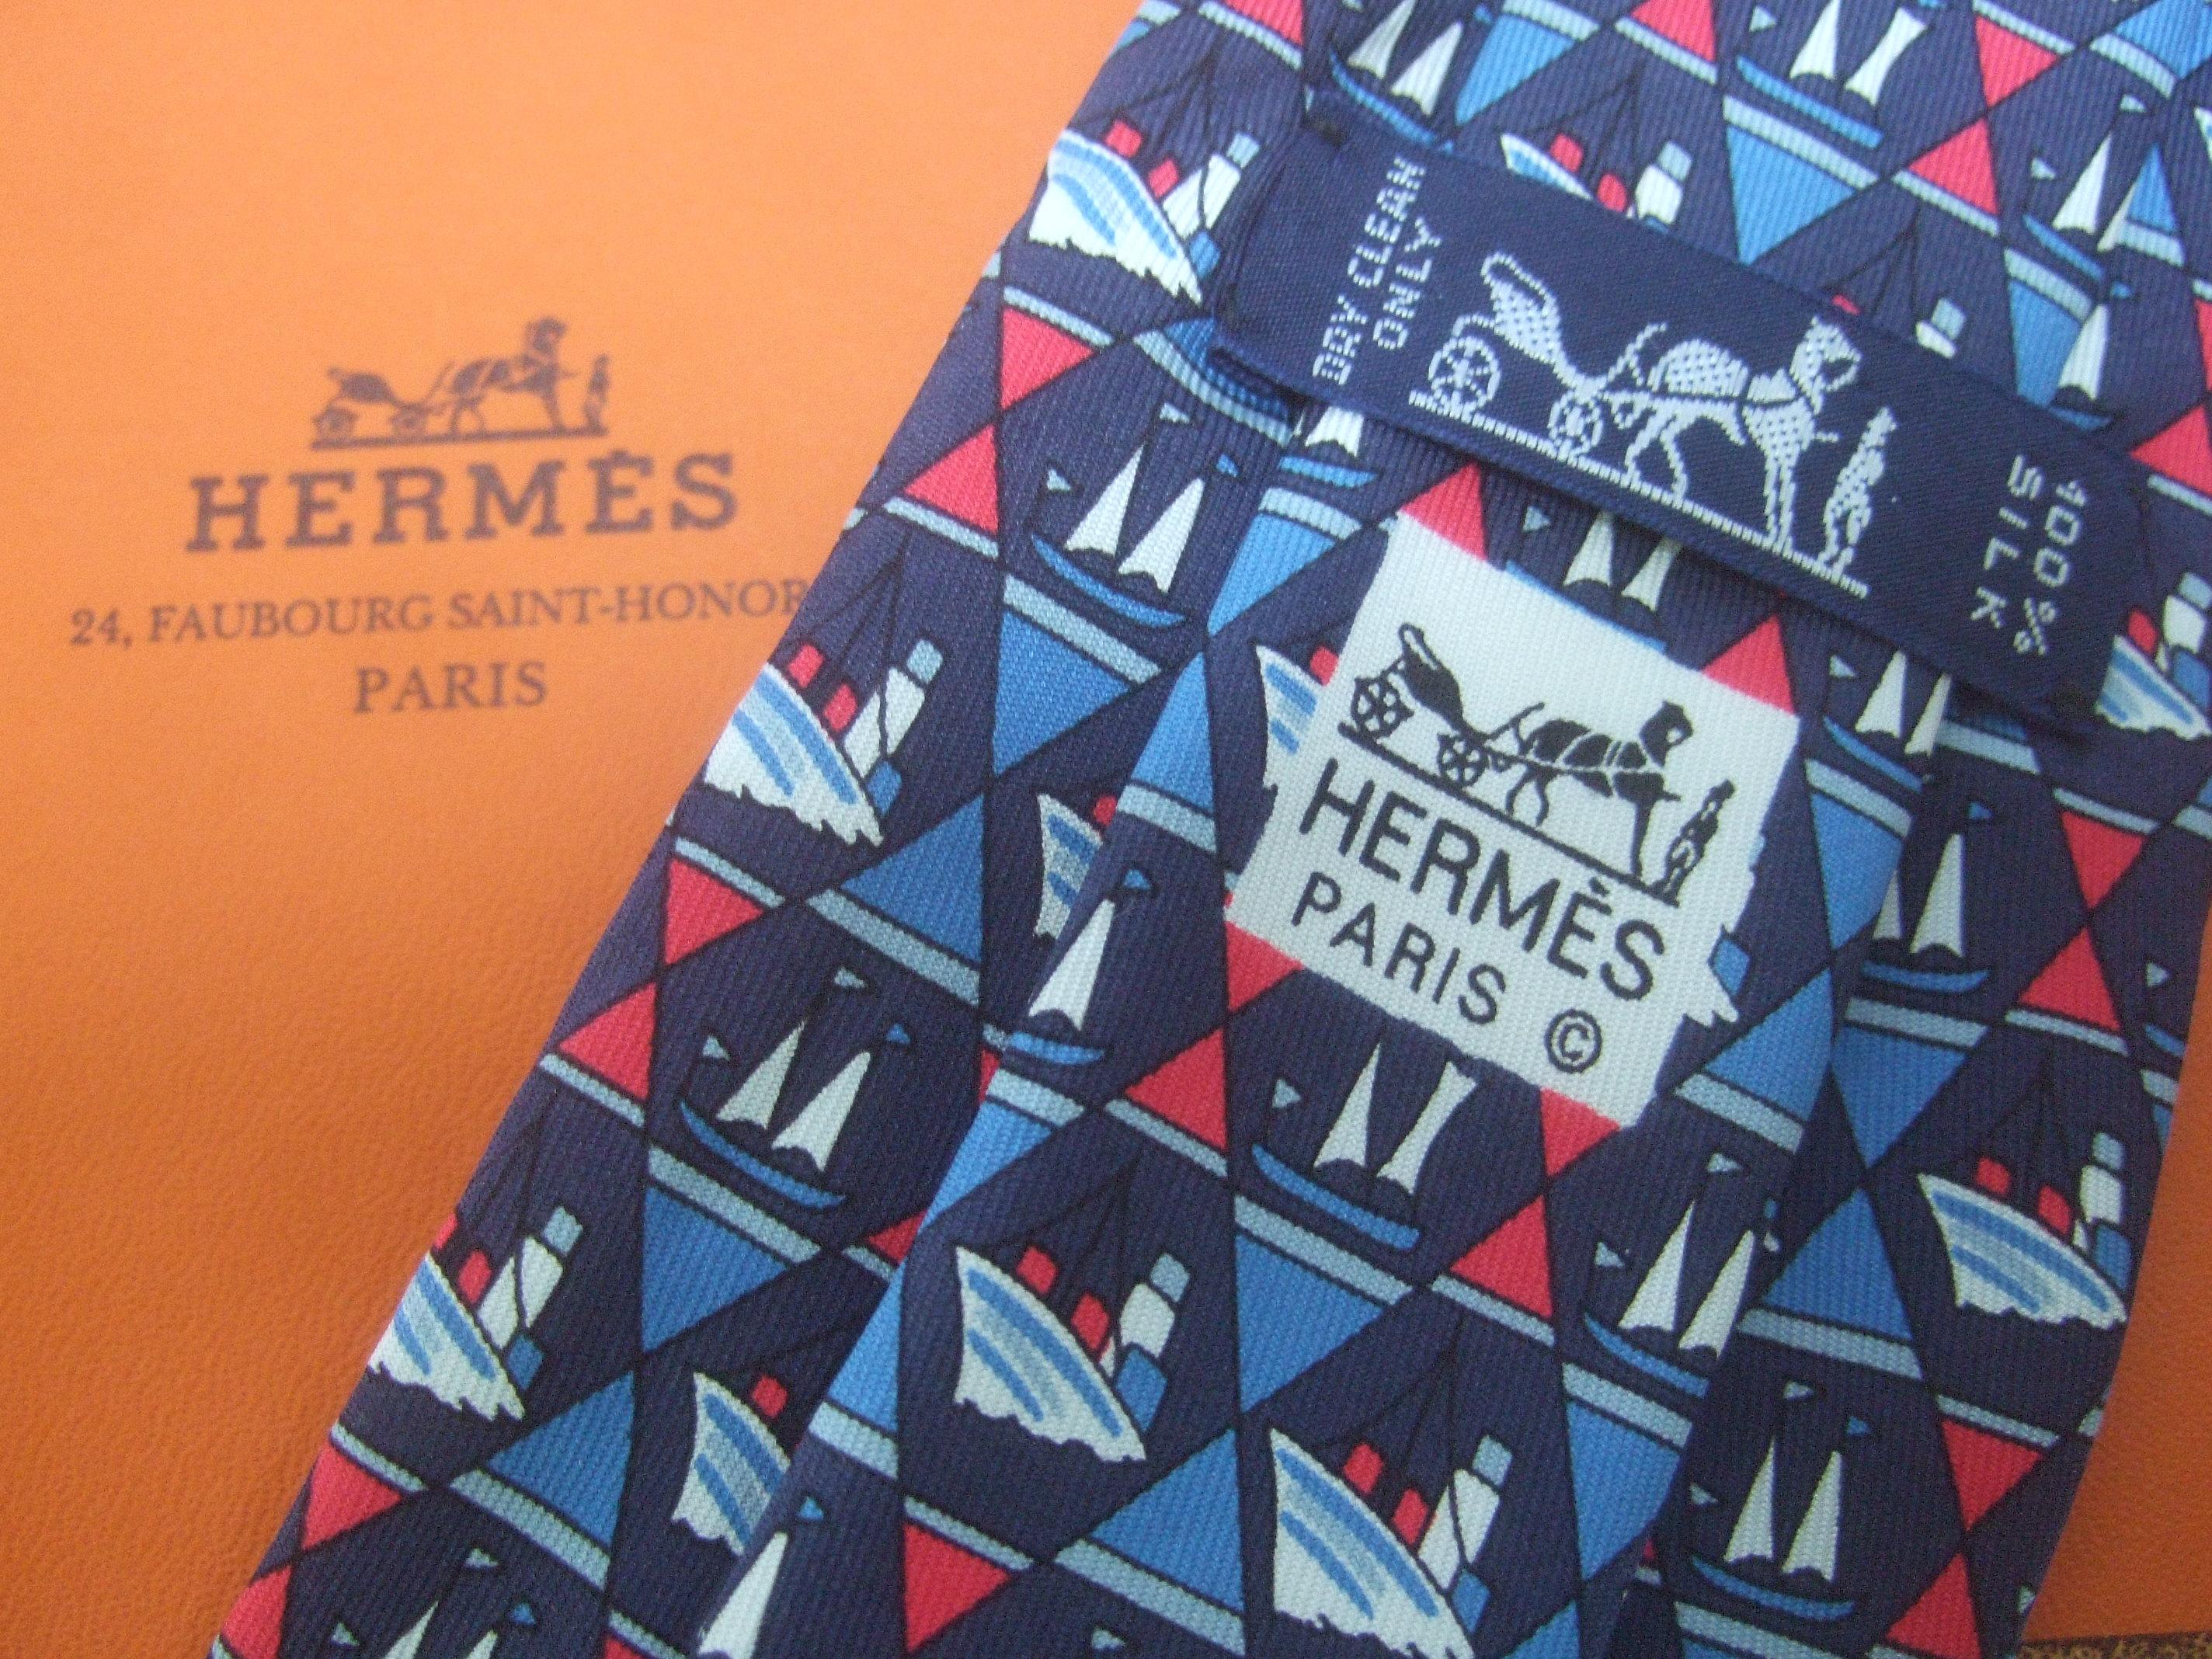 Hermes Paris Nautical sailboat silk necktie in Hermes box c 1990s
The stylish necktie is designed with a collection of sailboats
and sailing ships in a geometric diamond pattern 

The series of sailboats are illuminated with red, white and
blue